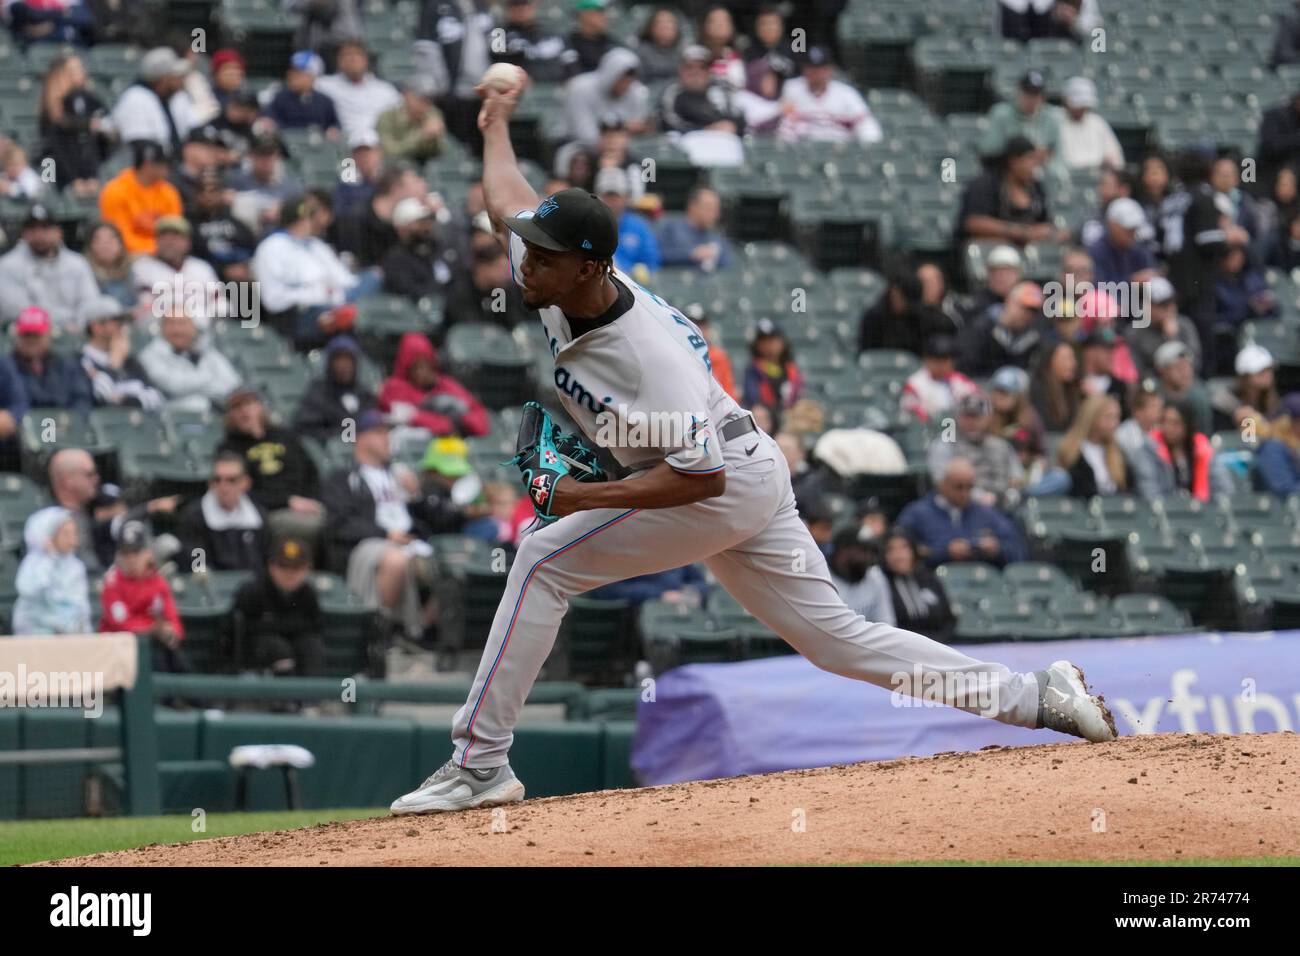 Miami Marlins relief pitcher Huascar Brazoban throws a pitch in the News  Photo - Getty Images